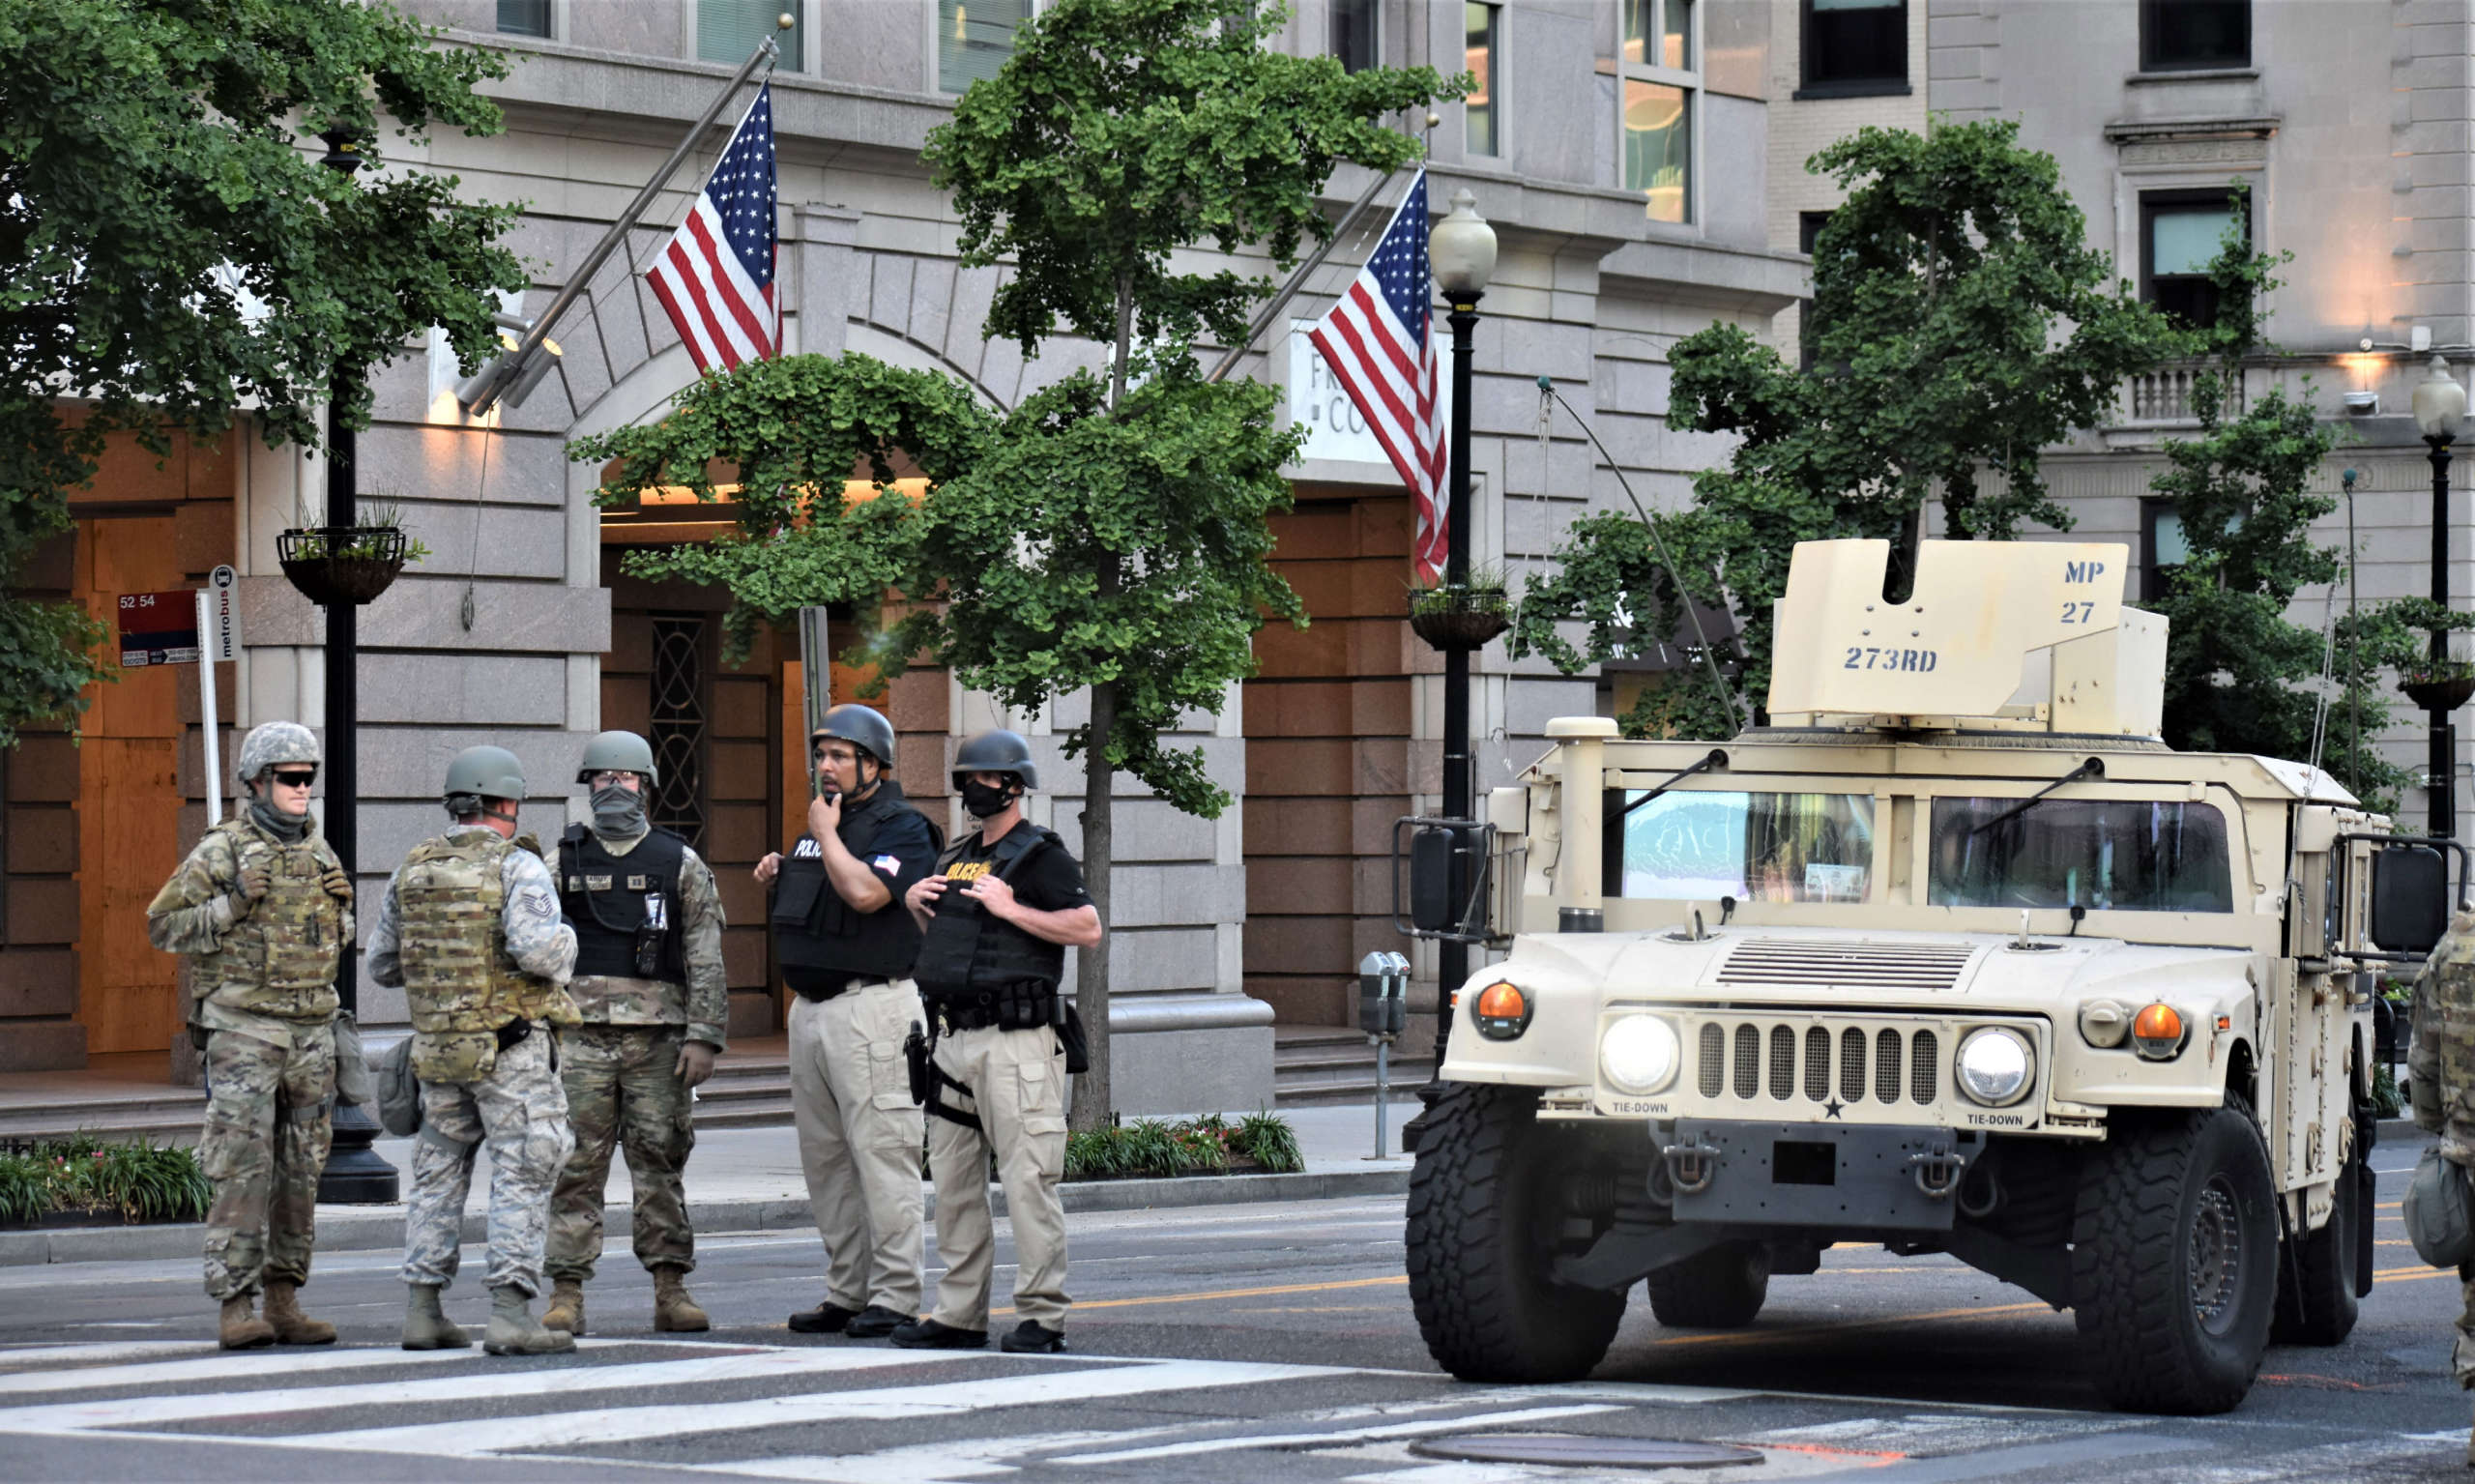 Members of the U.S. military occupy an intersection near the White House on June 2. The Secret Service has indefinitely closed many of the area roads blocking them off with the use of agencies such as the Drug Enforcement Administration, the Bureau of Alcohol, Tobacco, Firearms and Explosives, and the military. 